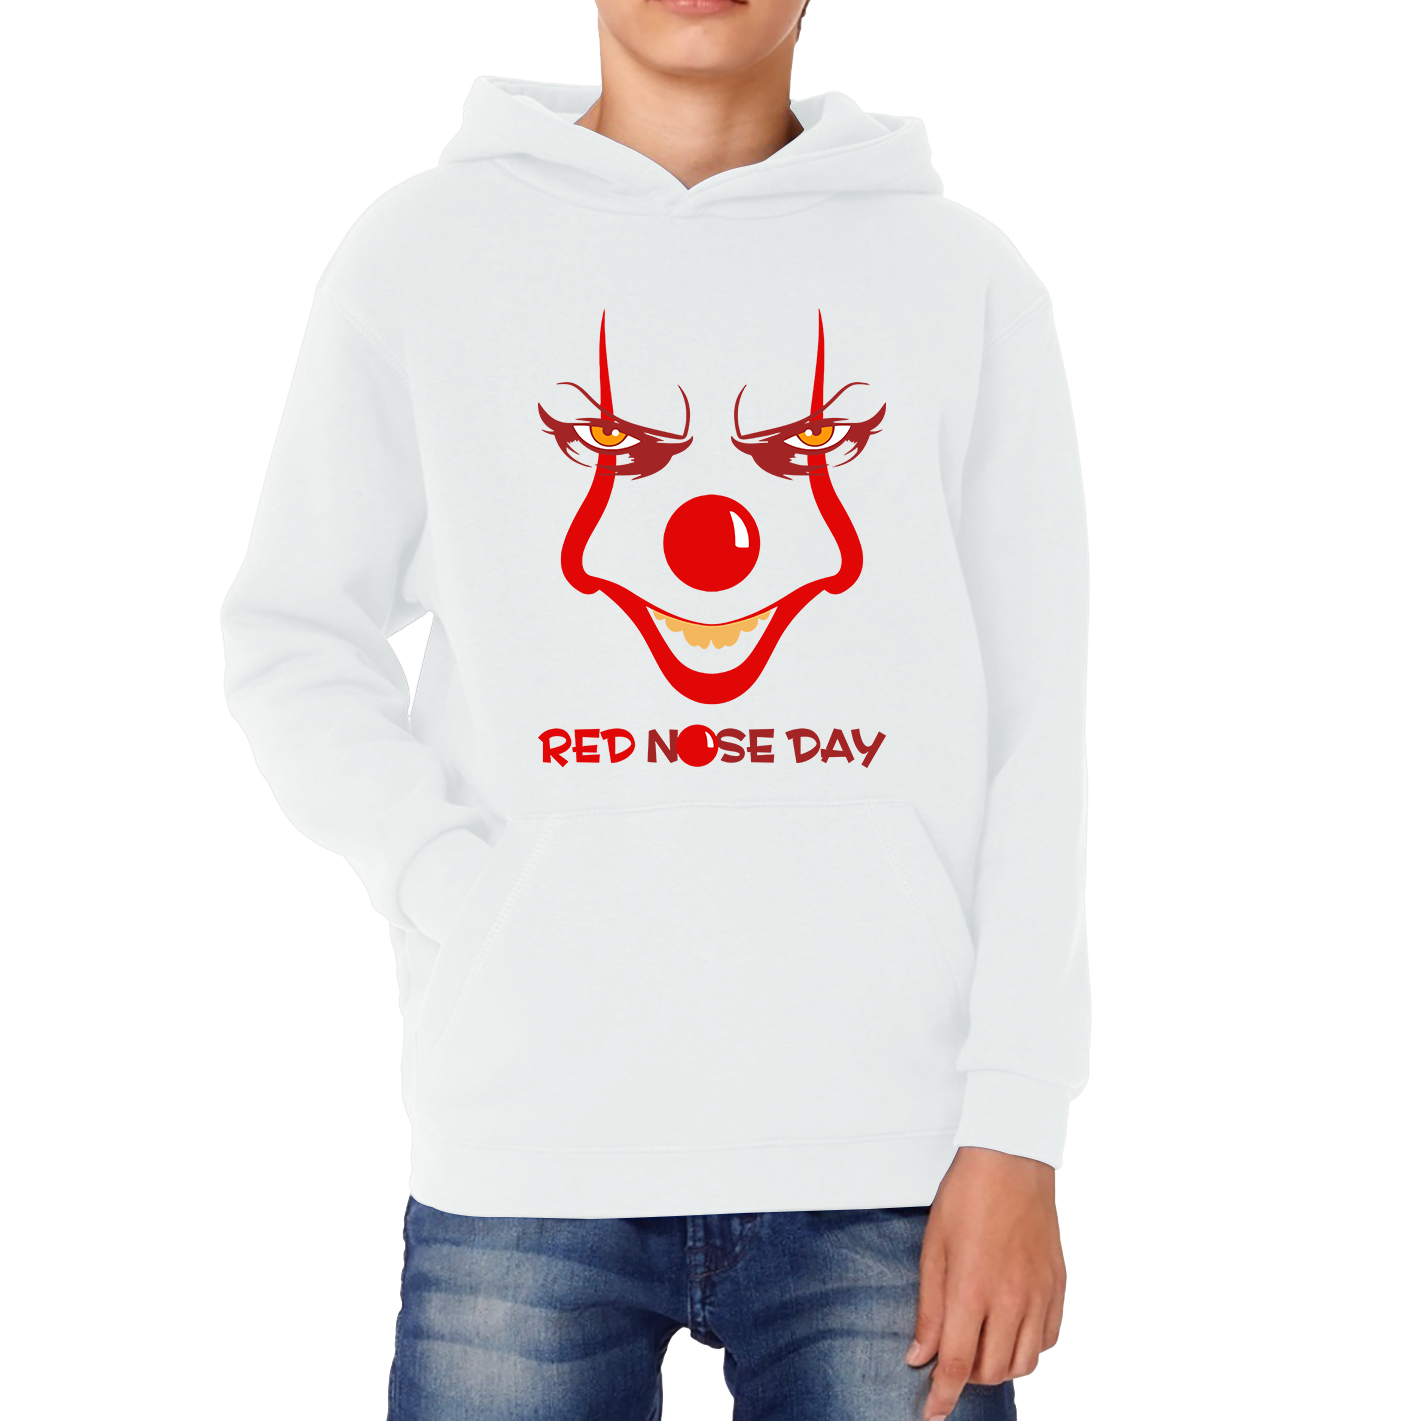 Pennywise Clown Face Red Nose Day Funny Comic Relief Kids Hoodie. 50% Goes To Charity